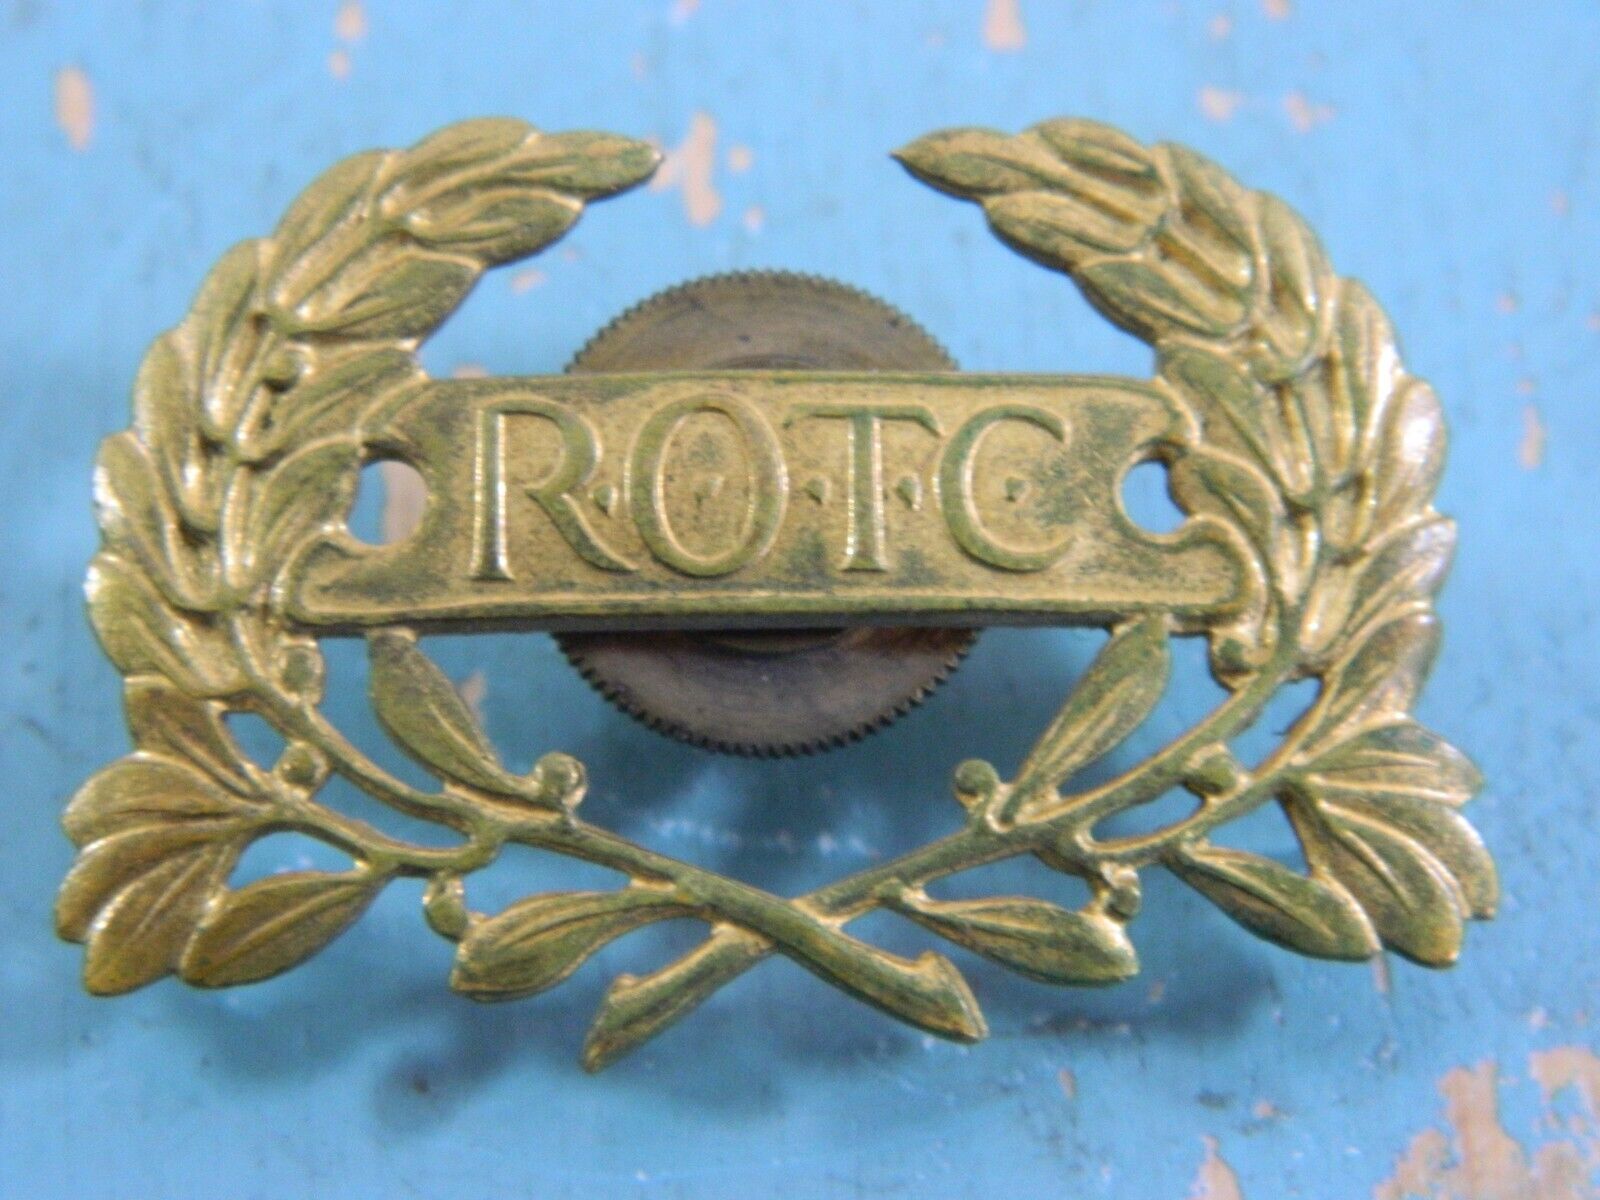 US Army WWII ROTC Metal Cap Device Uniform Pin Screw Back Collar Disk Military